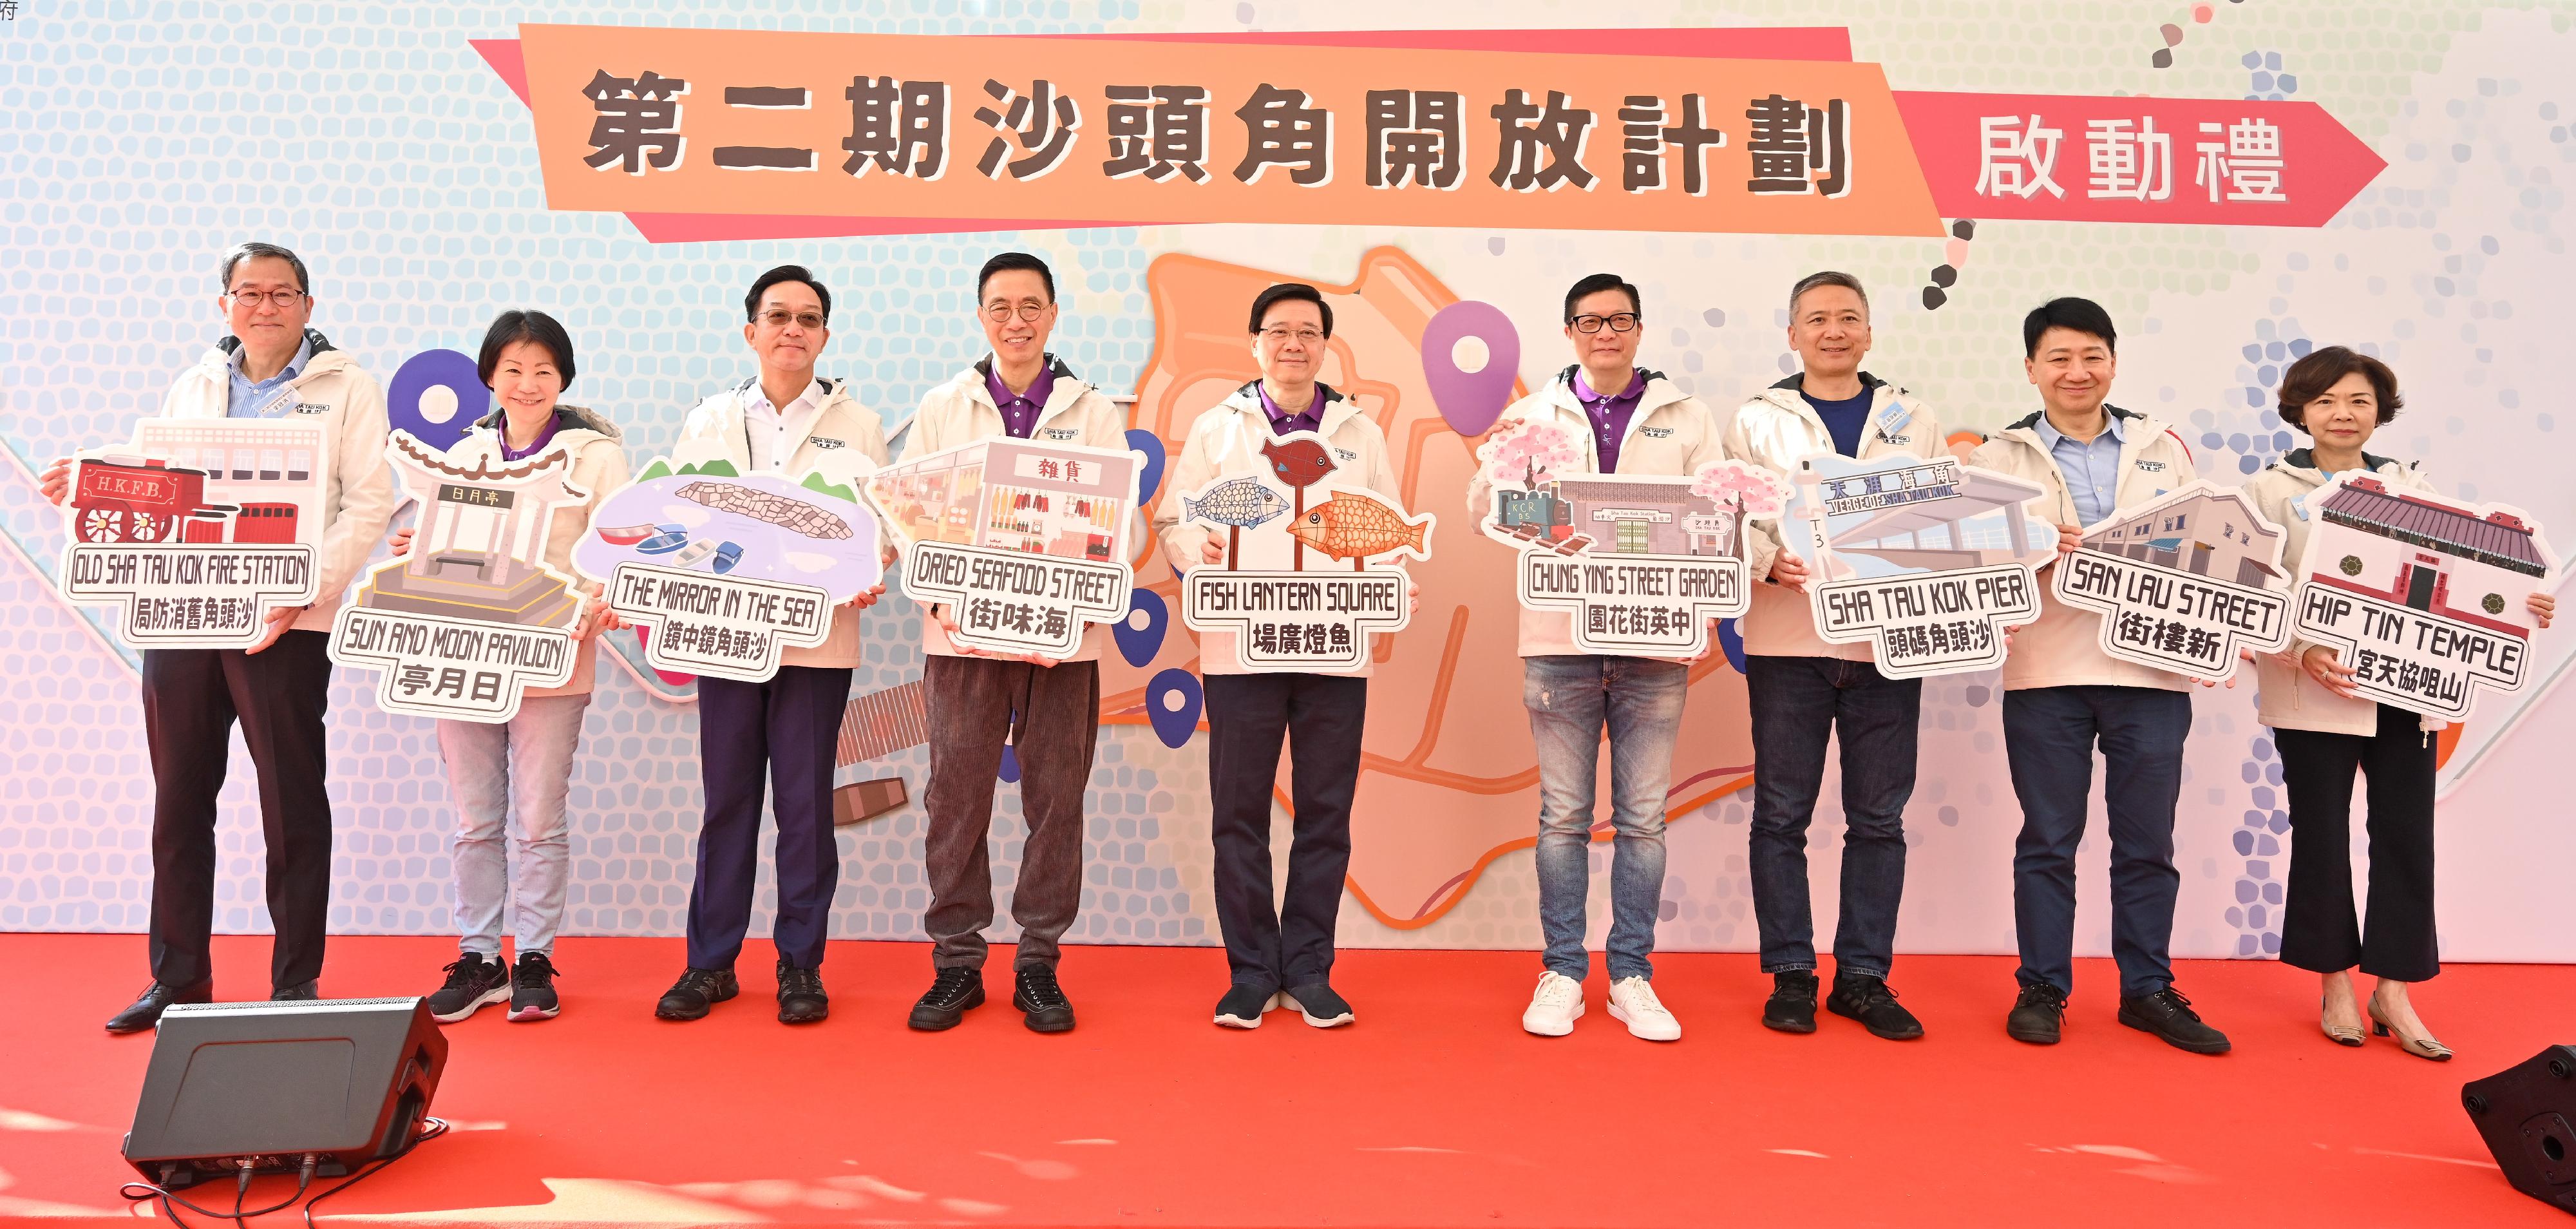 The Chief Executive, Mr John Lee, officiated at the Second Phase Opening-up of Sha Tau Kok Launching Ceremony today (January 6). Photo shows Mr Lee (centre); the Secretary for Culture, Sports and Tourism, Mr Kevin Yeung (fourth left); the Secretary for Security, Mr Tang Ping-keung (fourth right); the Chairman of the New Territories Heung Yee Kuk, Mr Kenneth Lau (third left); Legislative Council Member Mr Yiu Pak-leung (third right); the Commissioner for Tourism, Ms Vivian Sum (second left); the Chairman of the Hong Kong Tourism Board, Dr Pang Yiu-kai (second right); the Chairman of the Sha Tau Kok District Rural Committee, Mr Lee Koon-hung (first left); and the Chairman of the Travel Industry Council of Hong Kong, Mrs Gianna Hsu (first right), at the launching ceremony.
